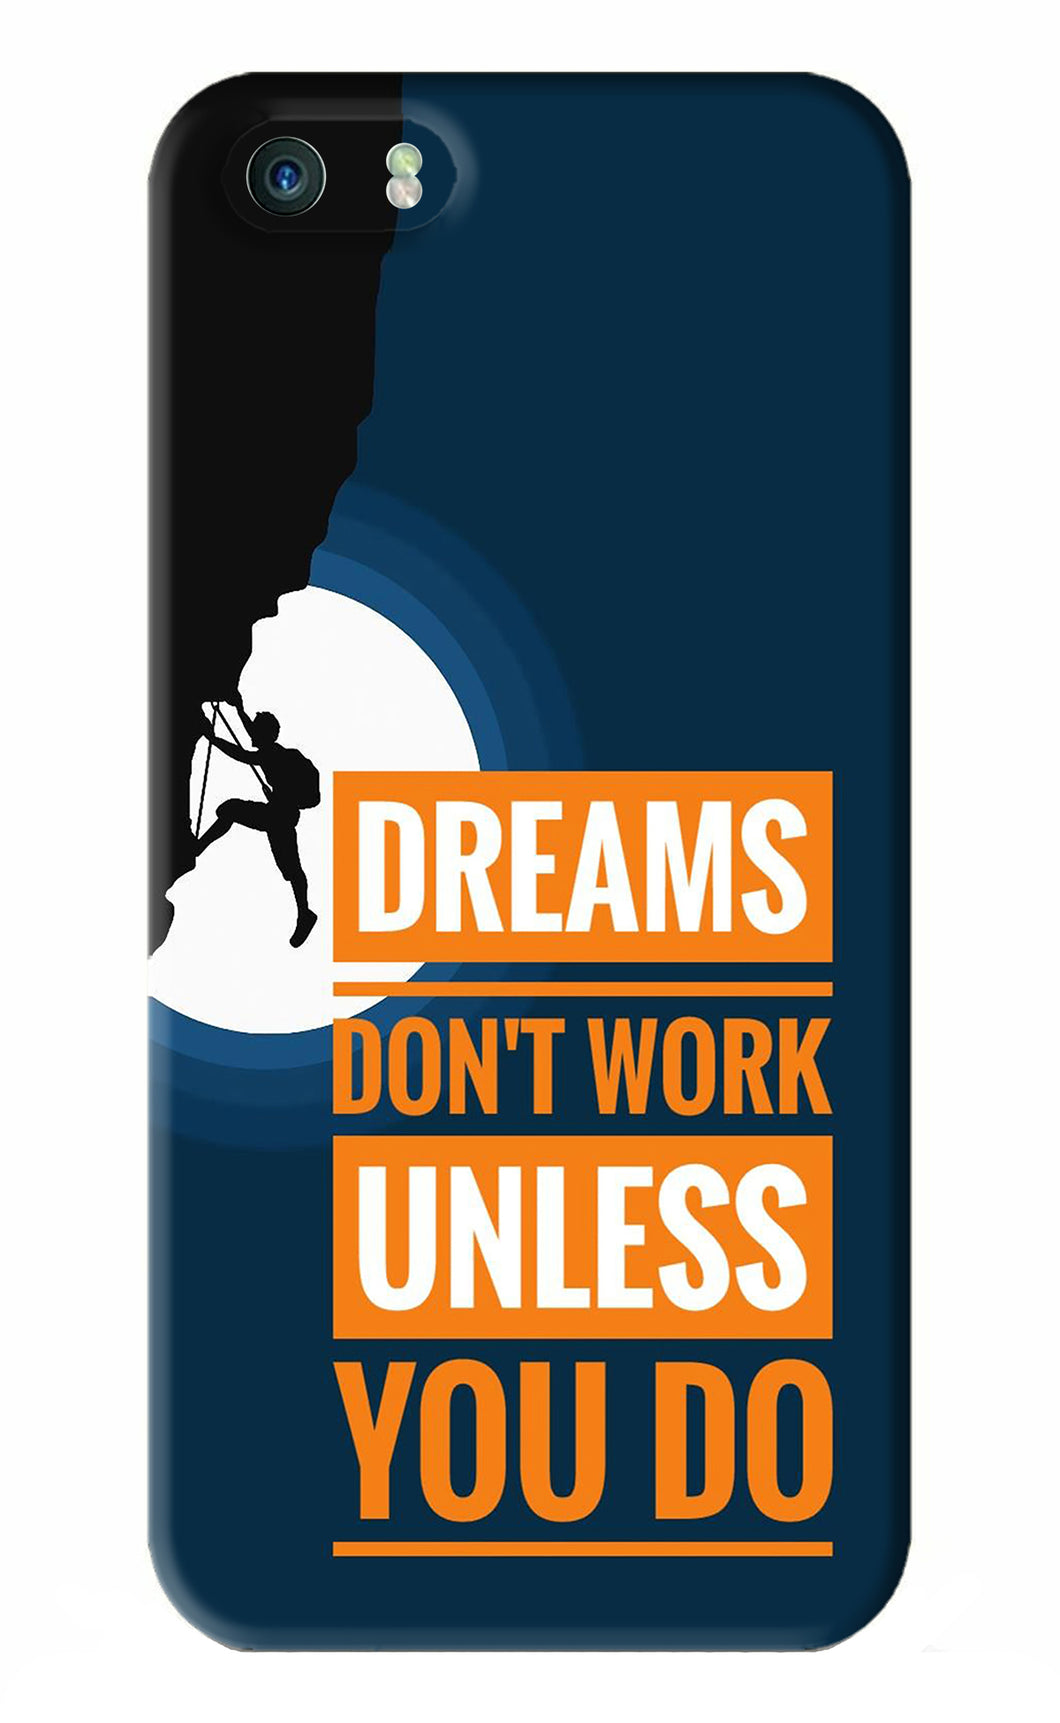 Dreams Don’T Work Unless You Do iPhone 5 Back Skin Wrap